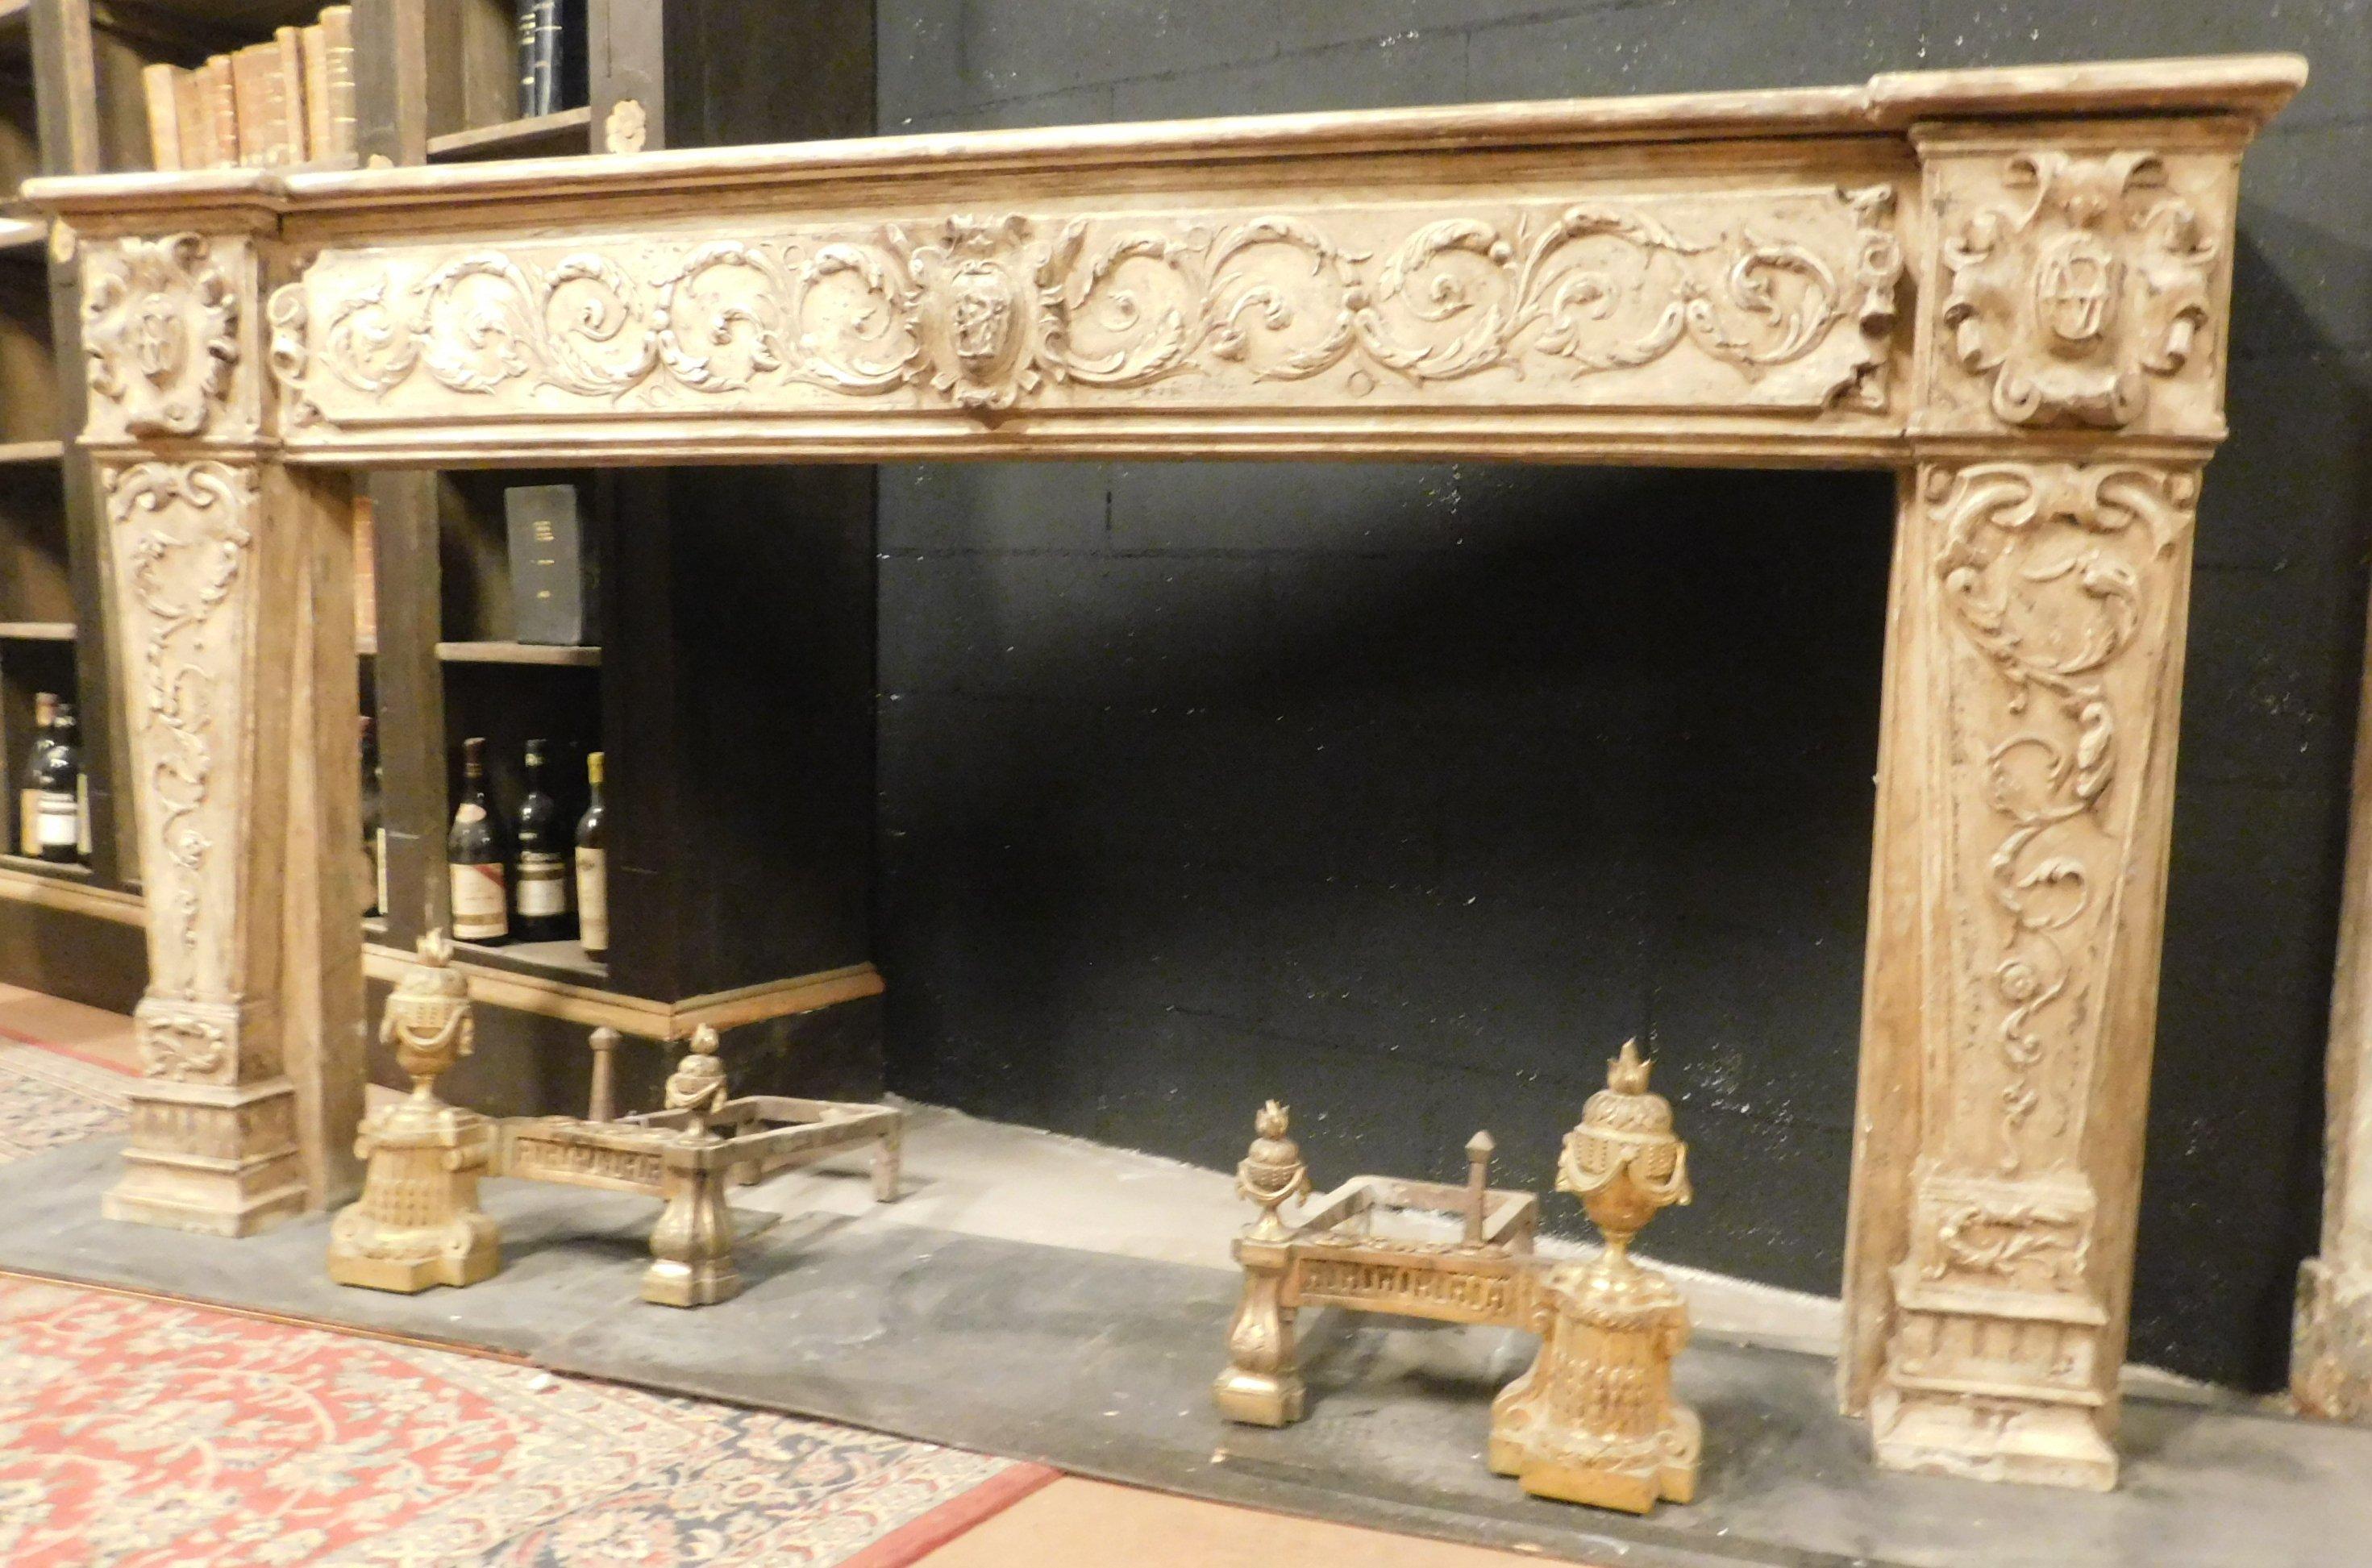 Antique fireplace in beige lacquered wood, very rich and well-defined floral sculptures, coming from an eighteenth-century house in France, elegant and refined, it is possible to lacquer it in another color if one wanted to, suitable for many